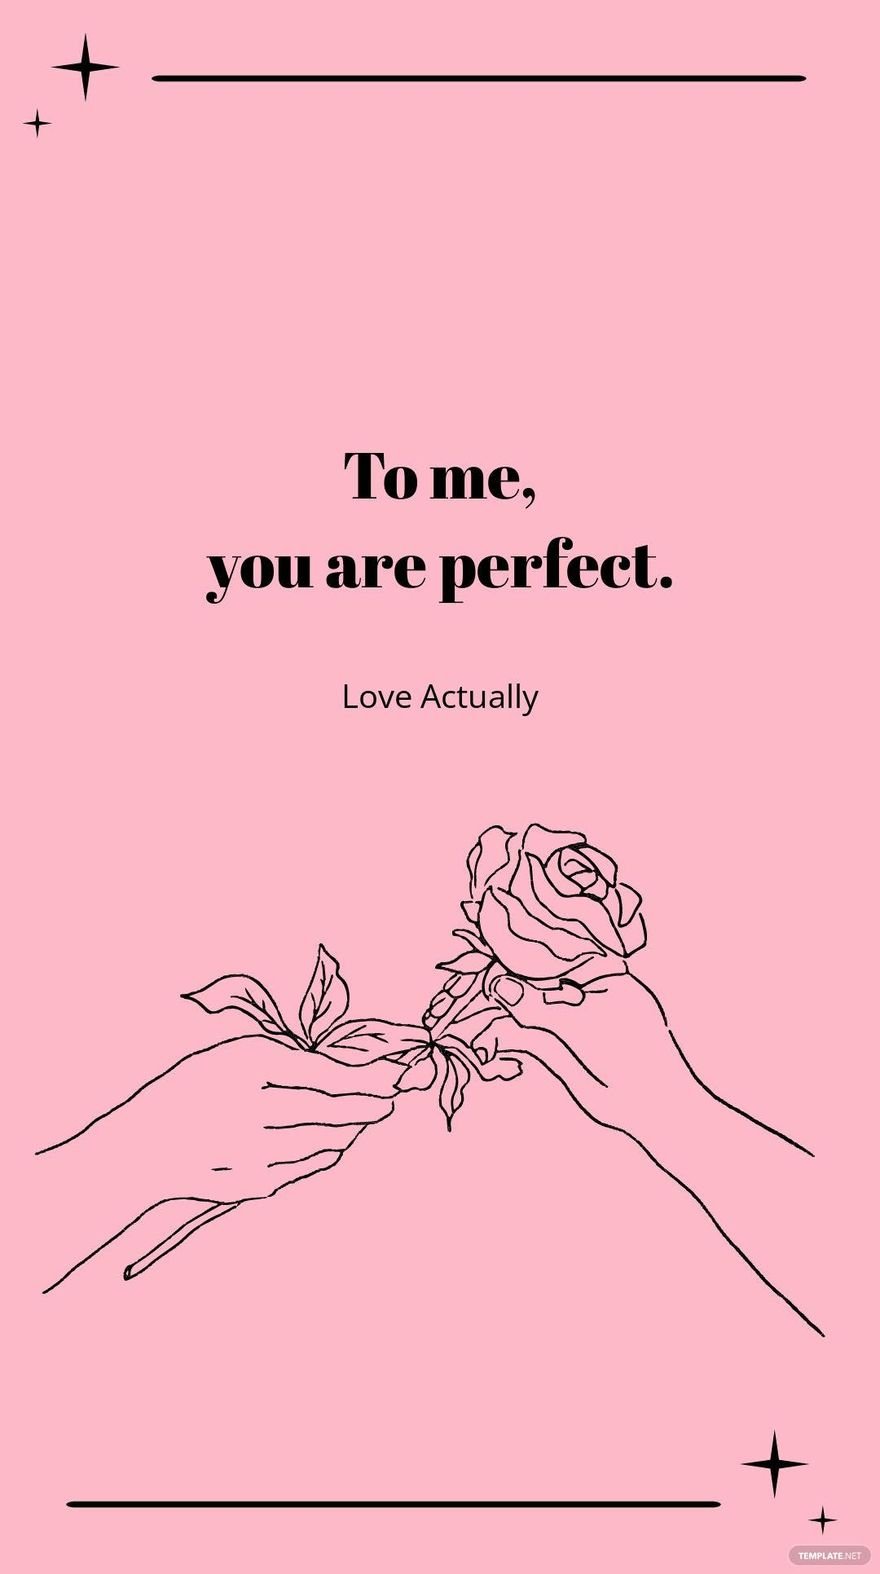 Love Actually - “To me, you are perfect.”